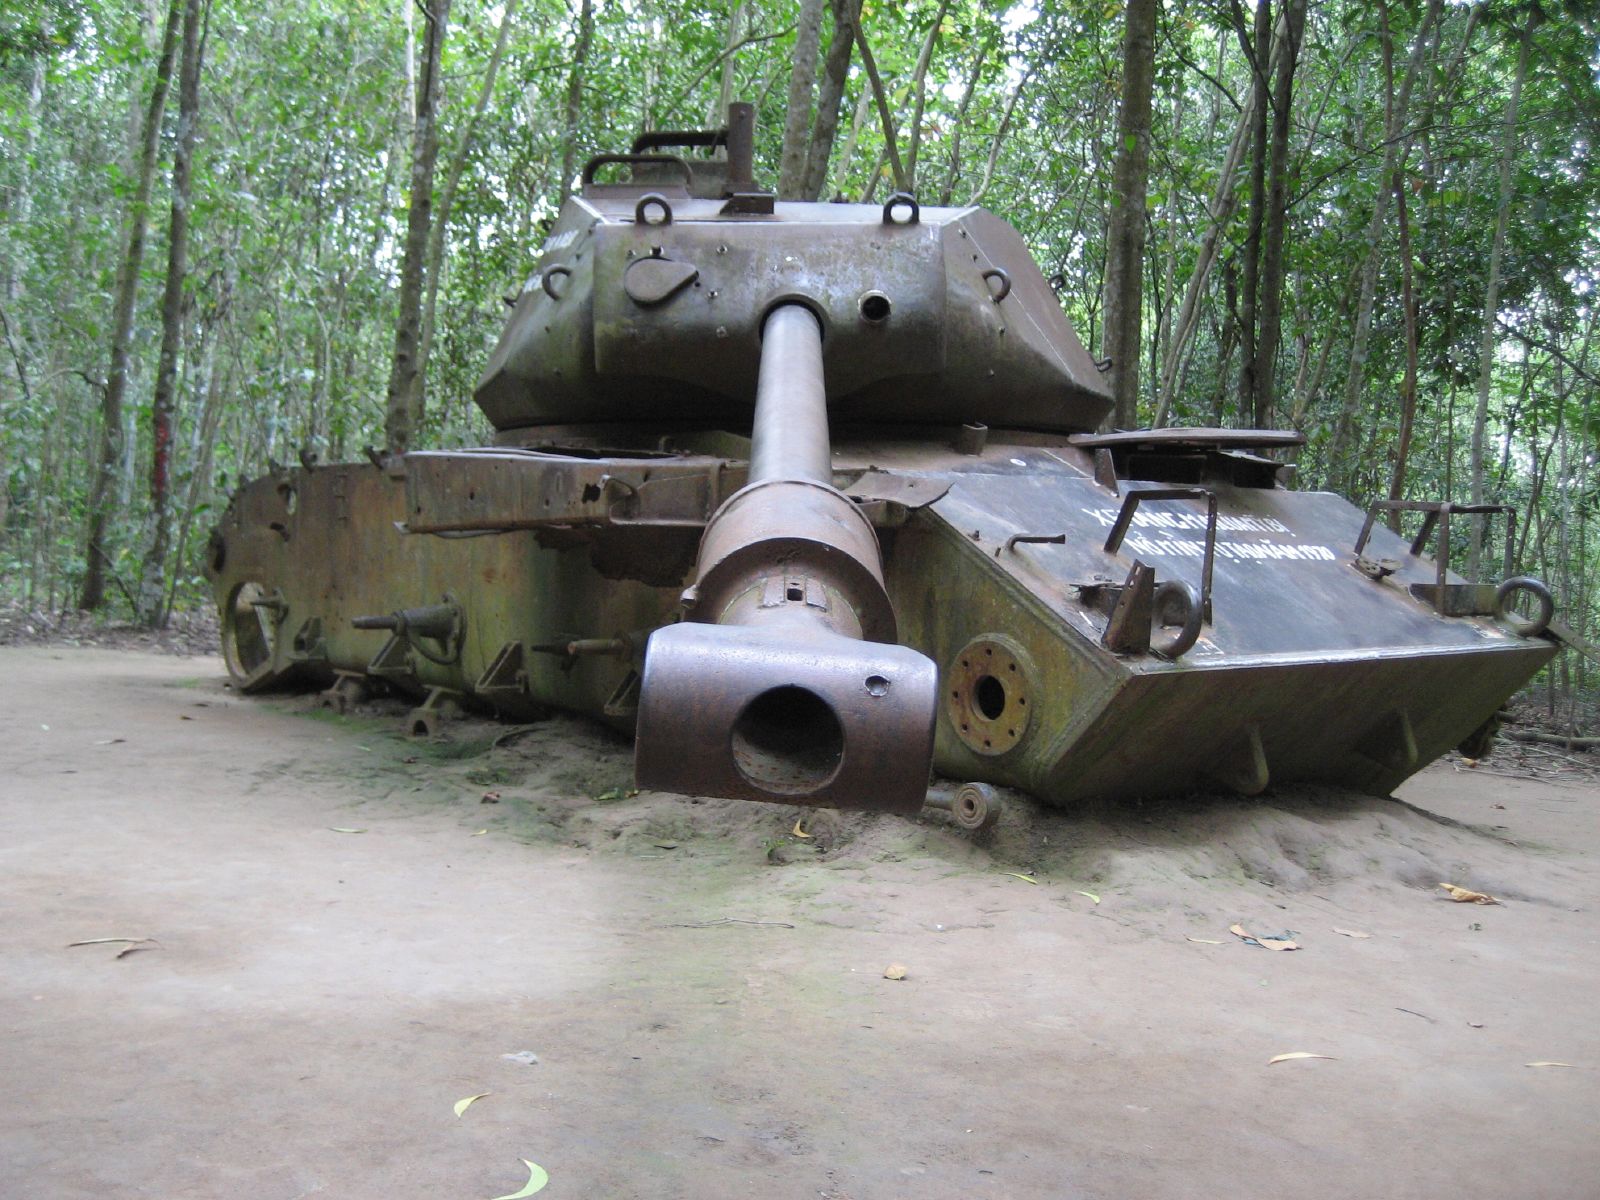 a rusted tank in front of some trees